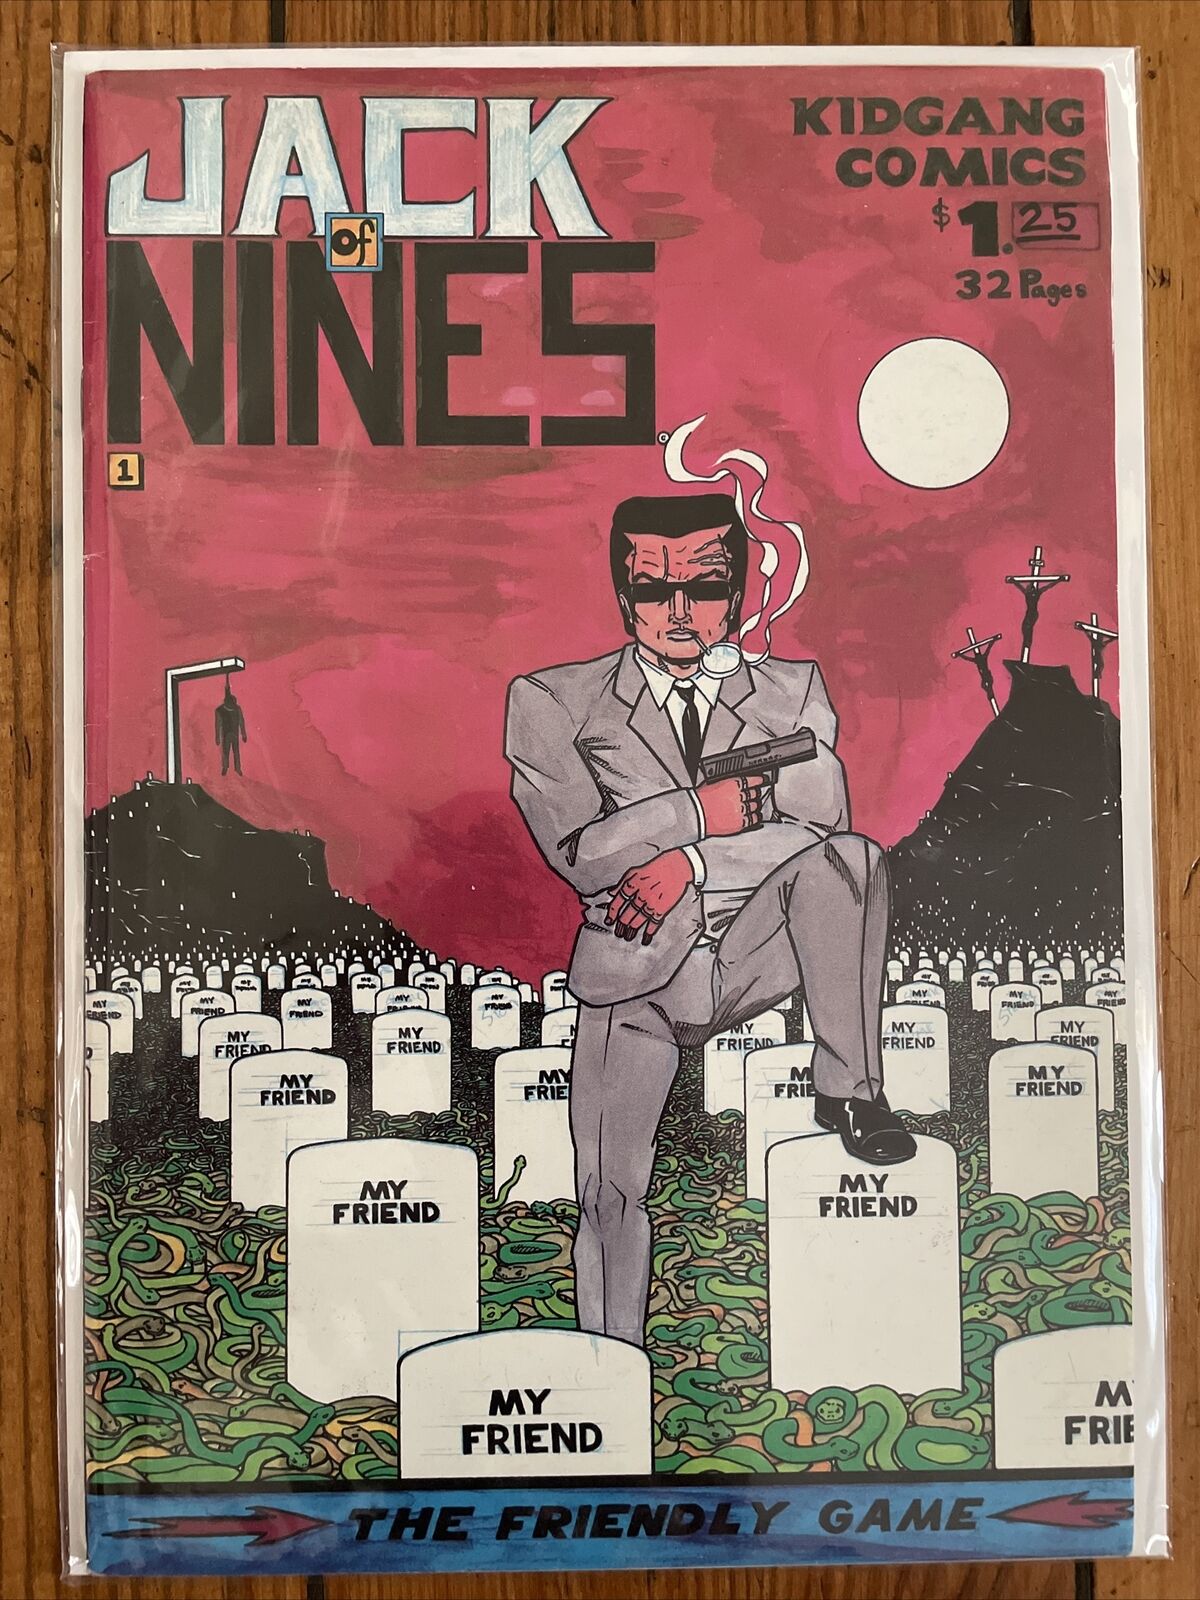 Jack of Nines #1 (1989 KidGang) Rare Independent Small Press Asian Outlaw Comics